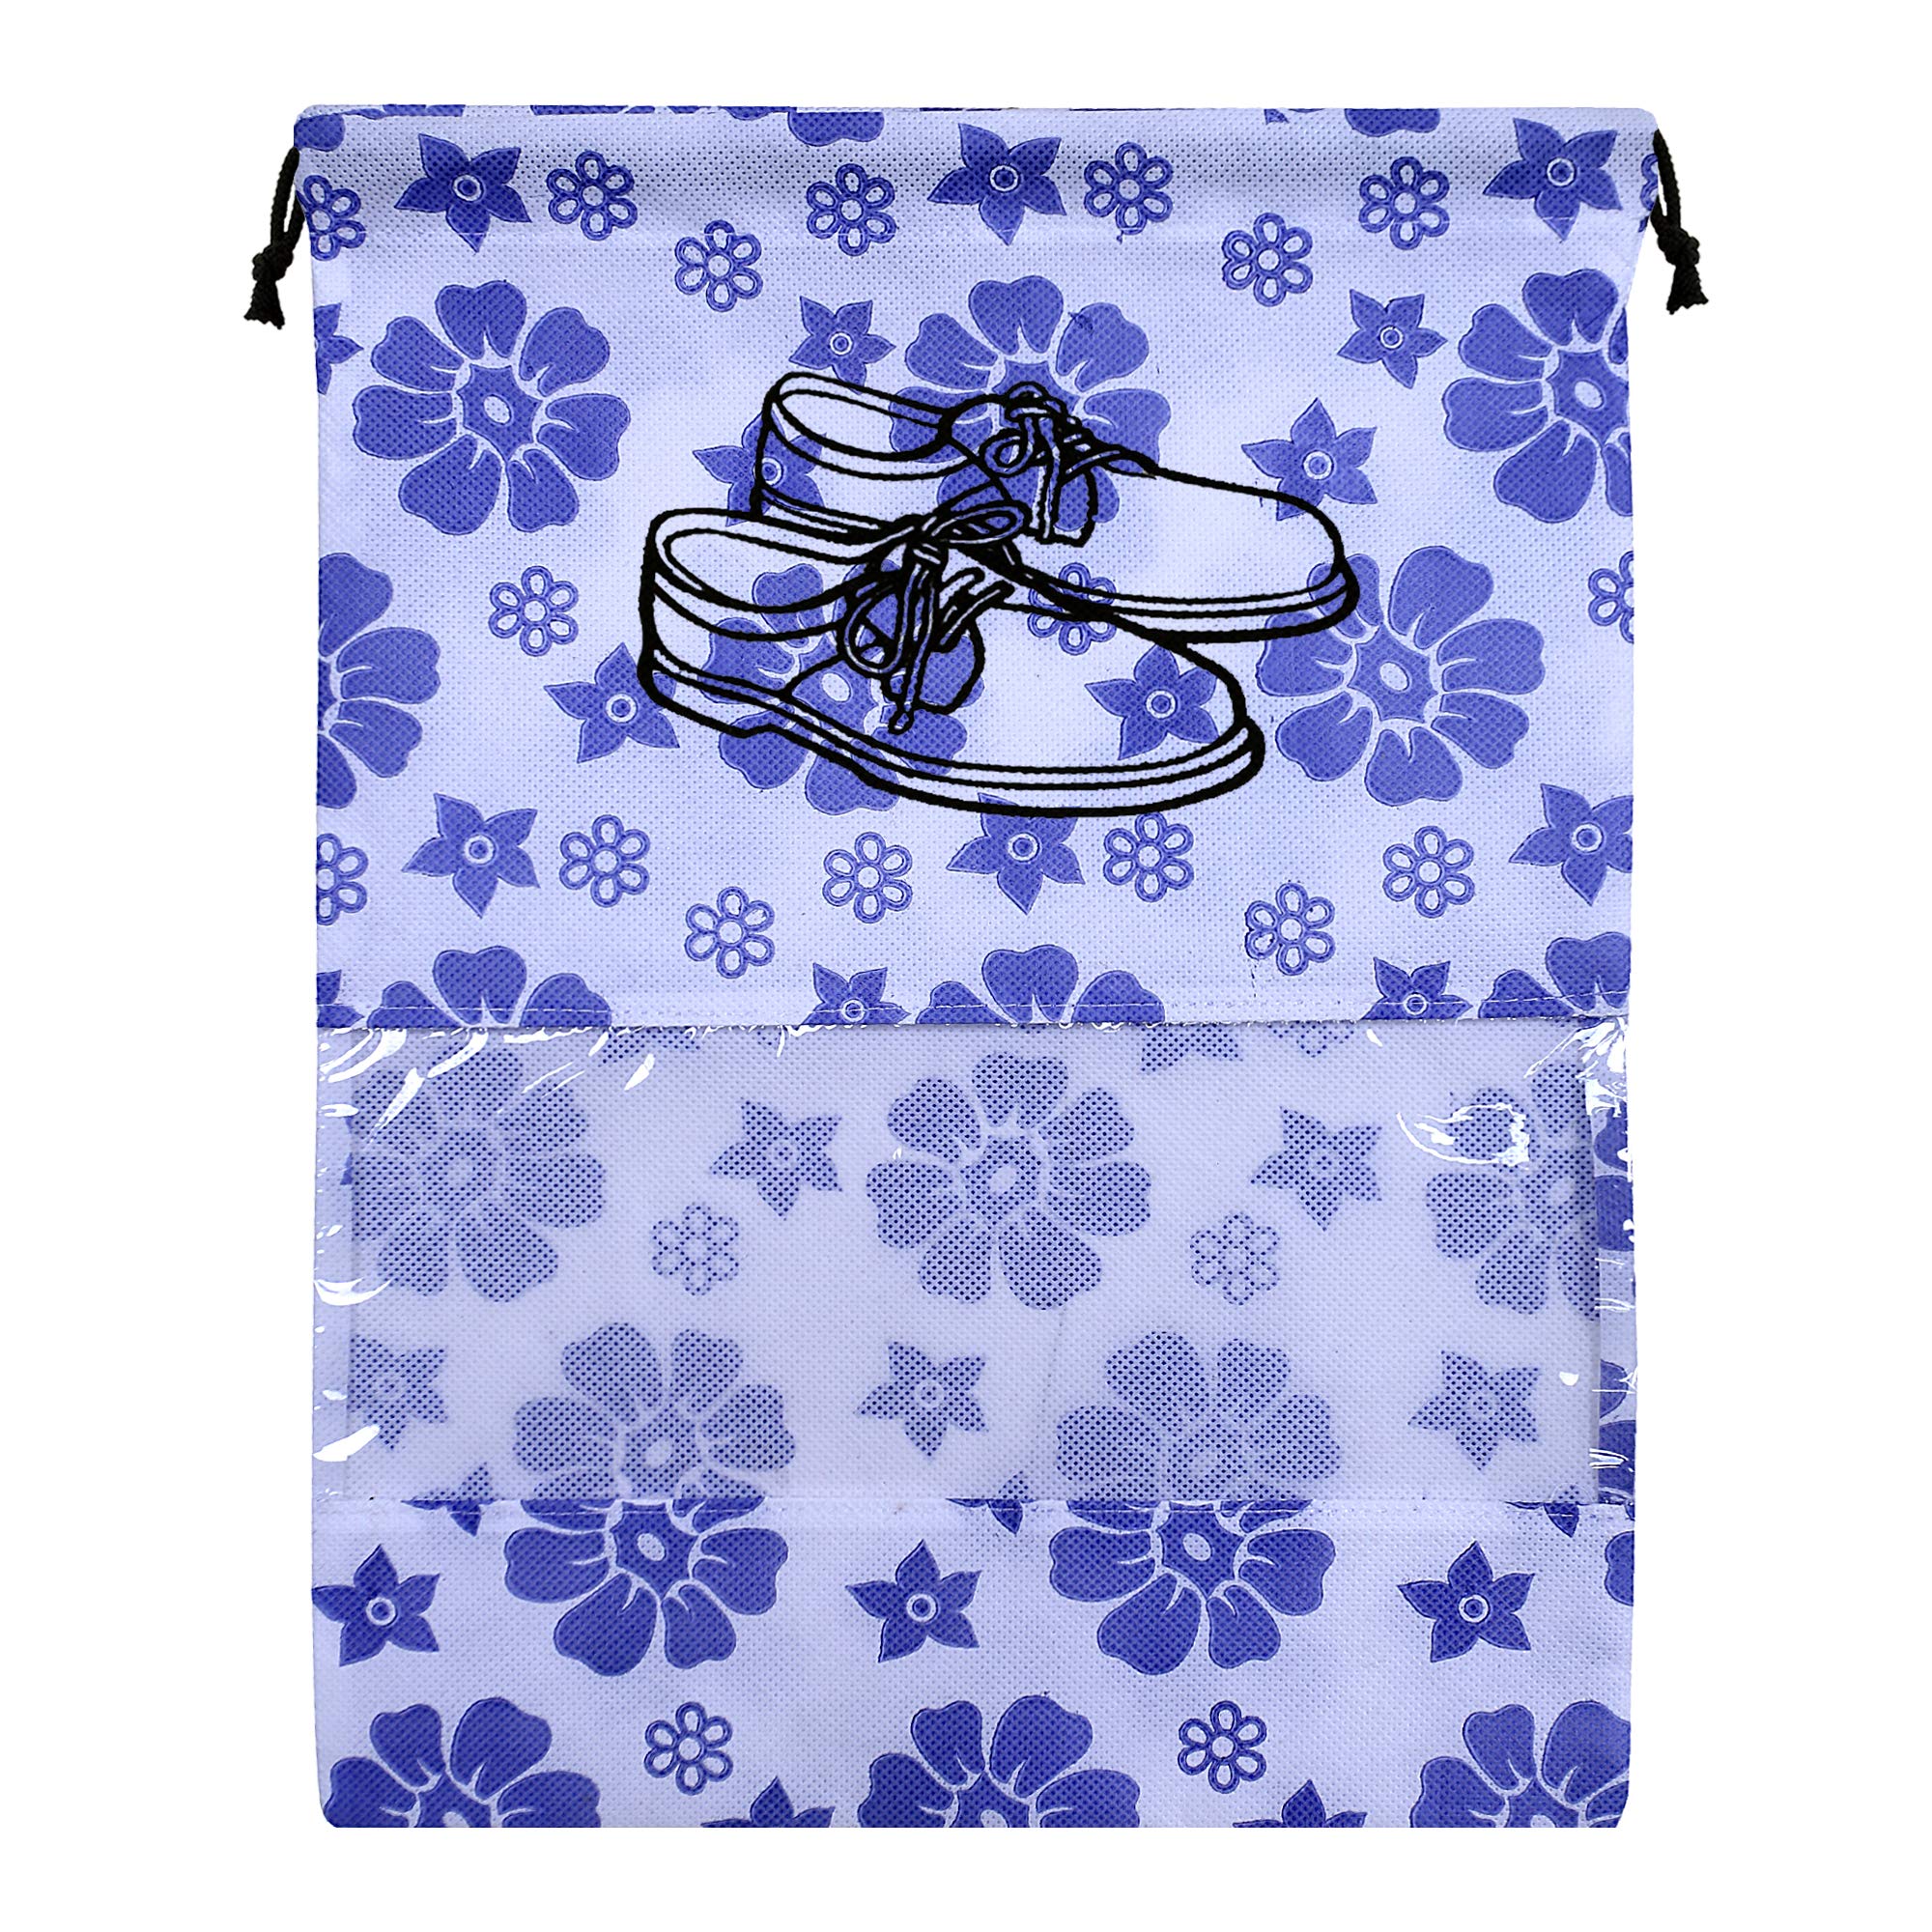 Kuber Industries Flower Design 24 Piece Non Woven Travel Shoe Cover, String Bag Organizer, Royal Blue -CTMTC039501